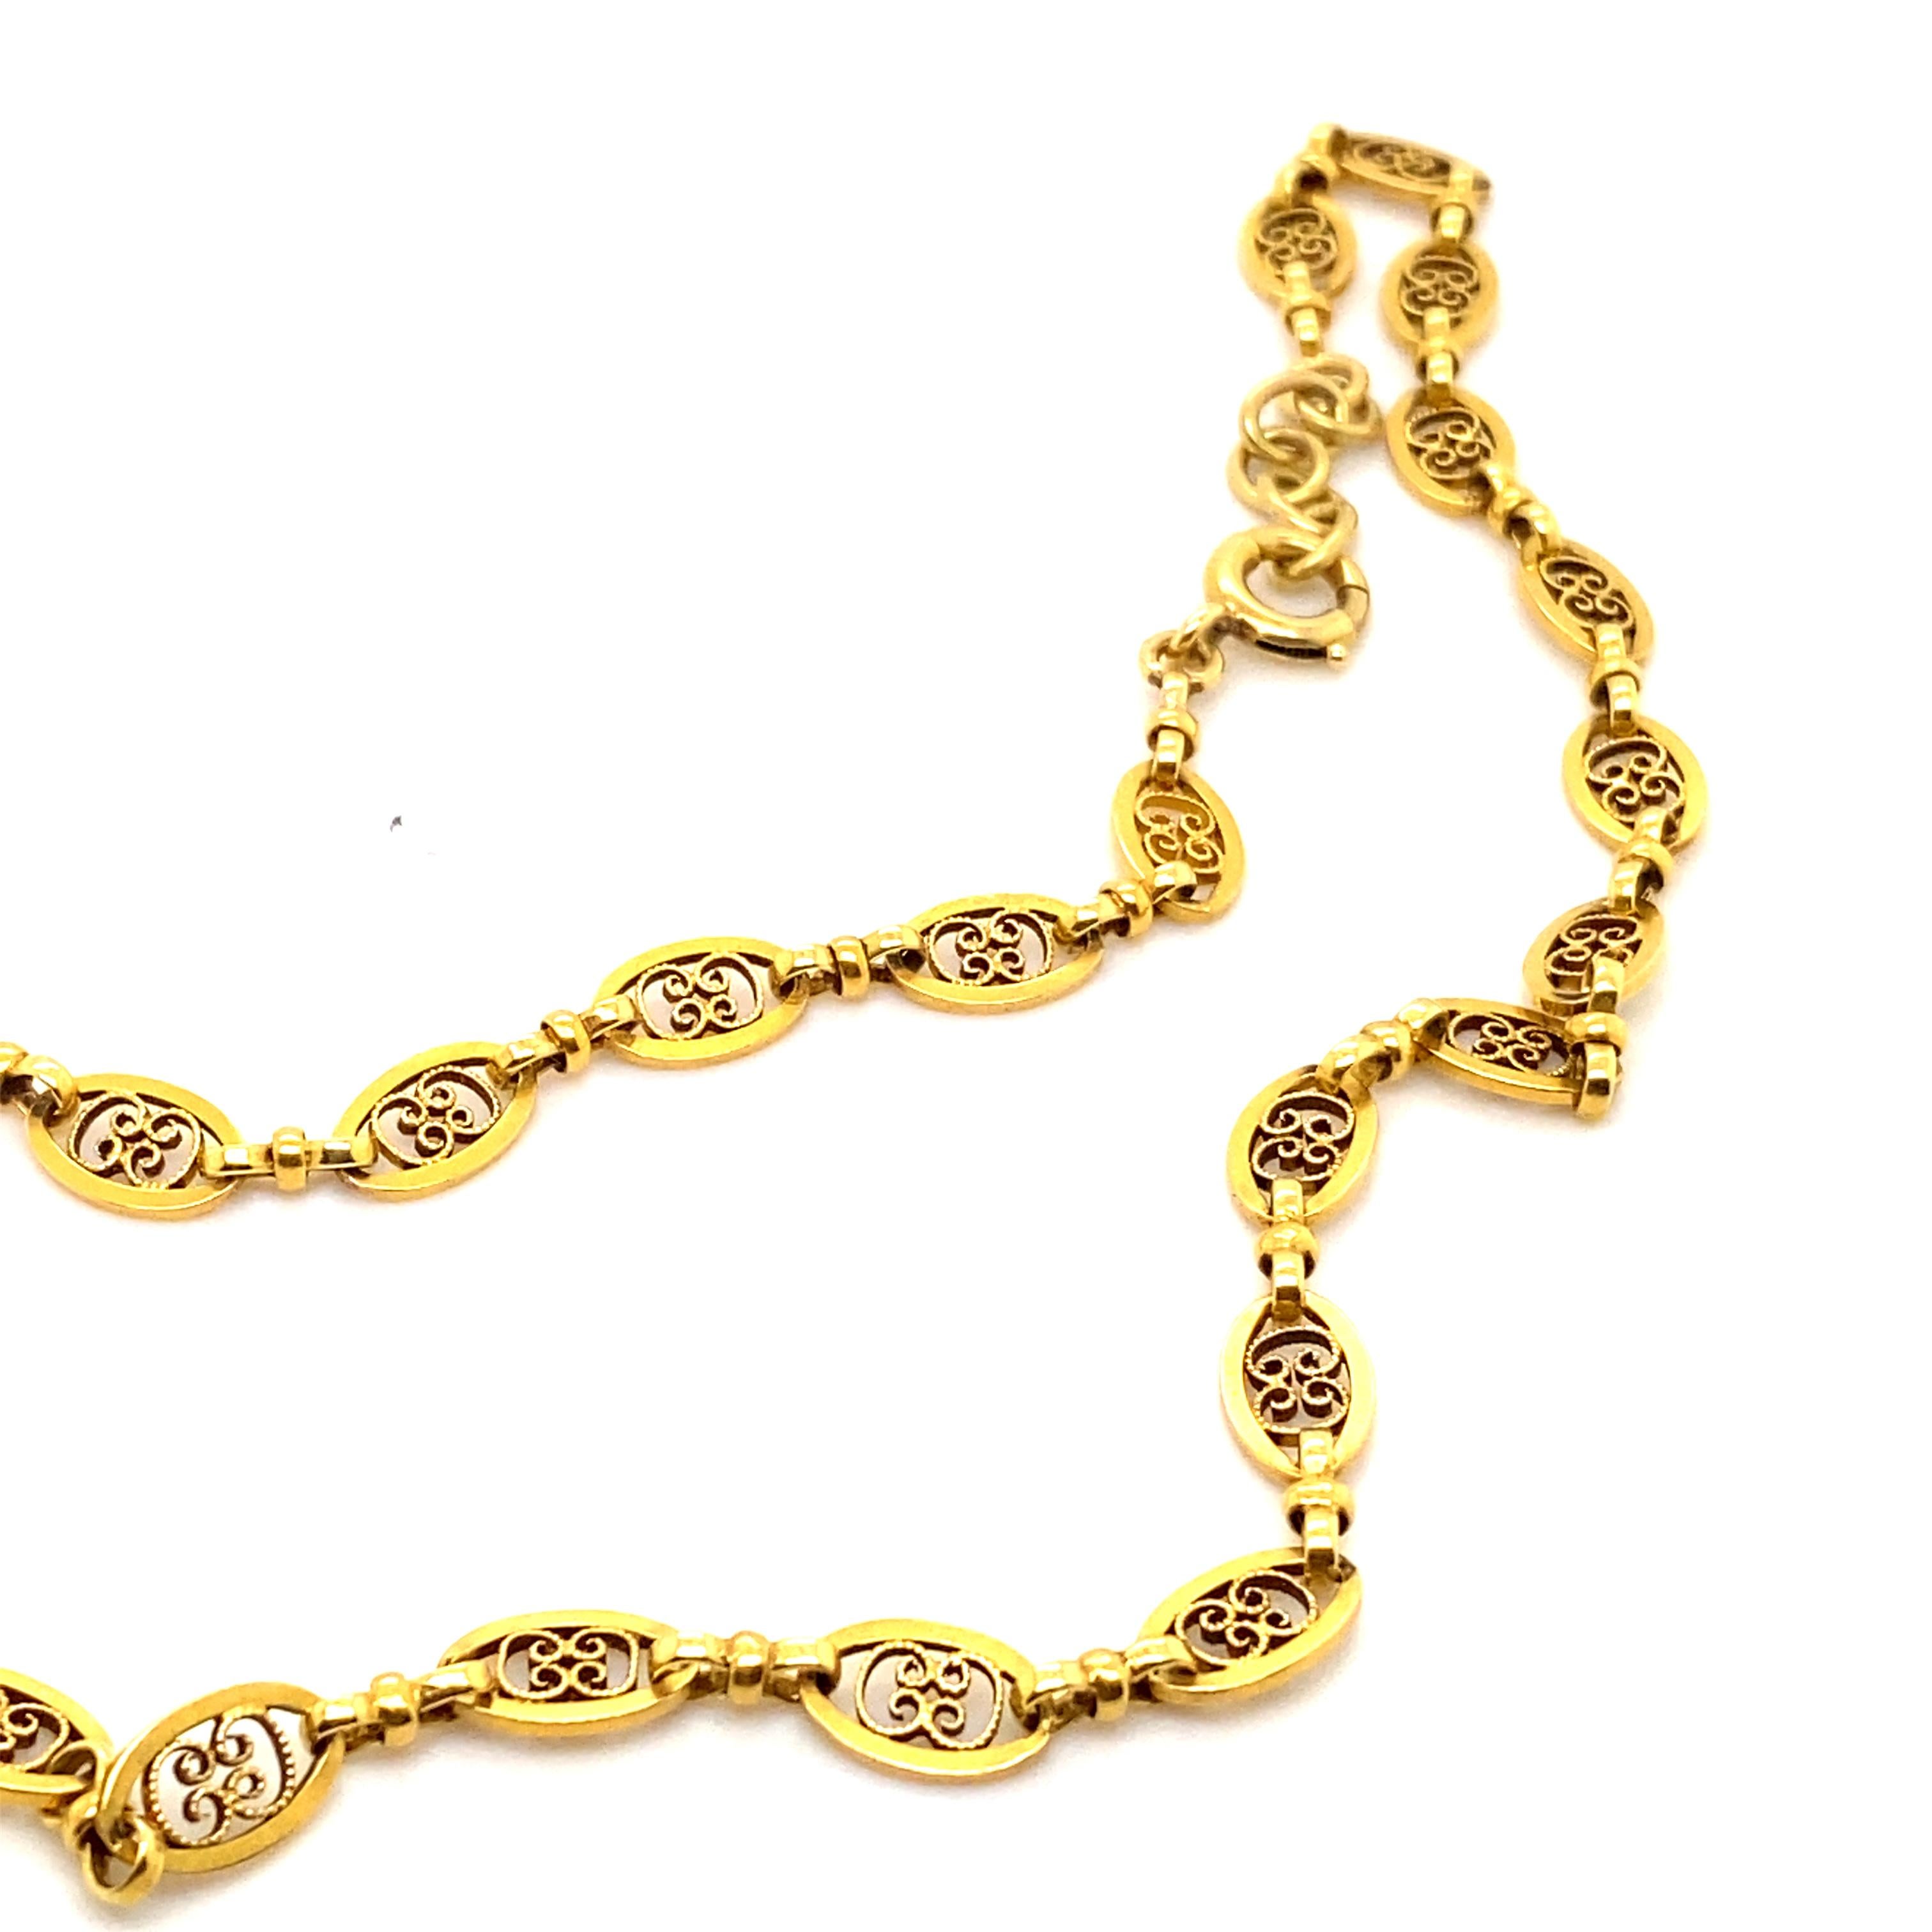 A Victorian guard chain in 18 karat yellow gold, circa 1900

The chain is comprised of oval motif links each with fine scrolled wire detail to its centre.

A beautiful example of a guard chain in wonderful condition, finished with a spring ring